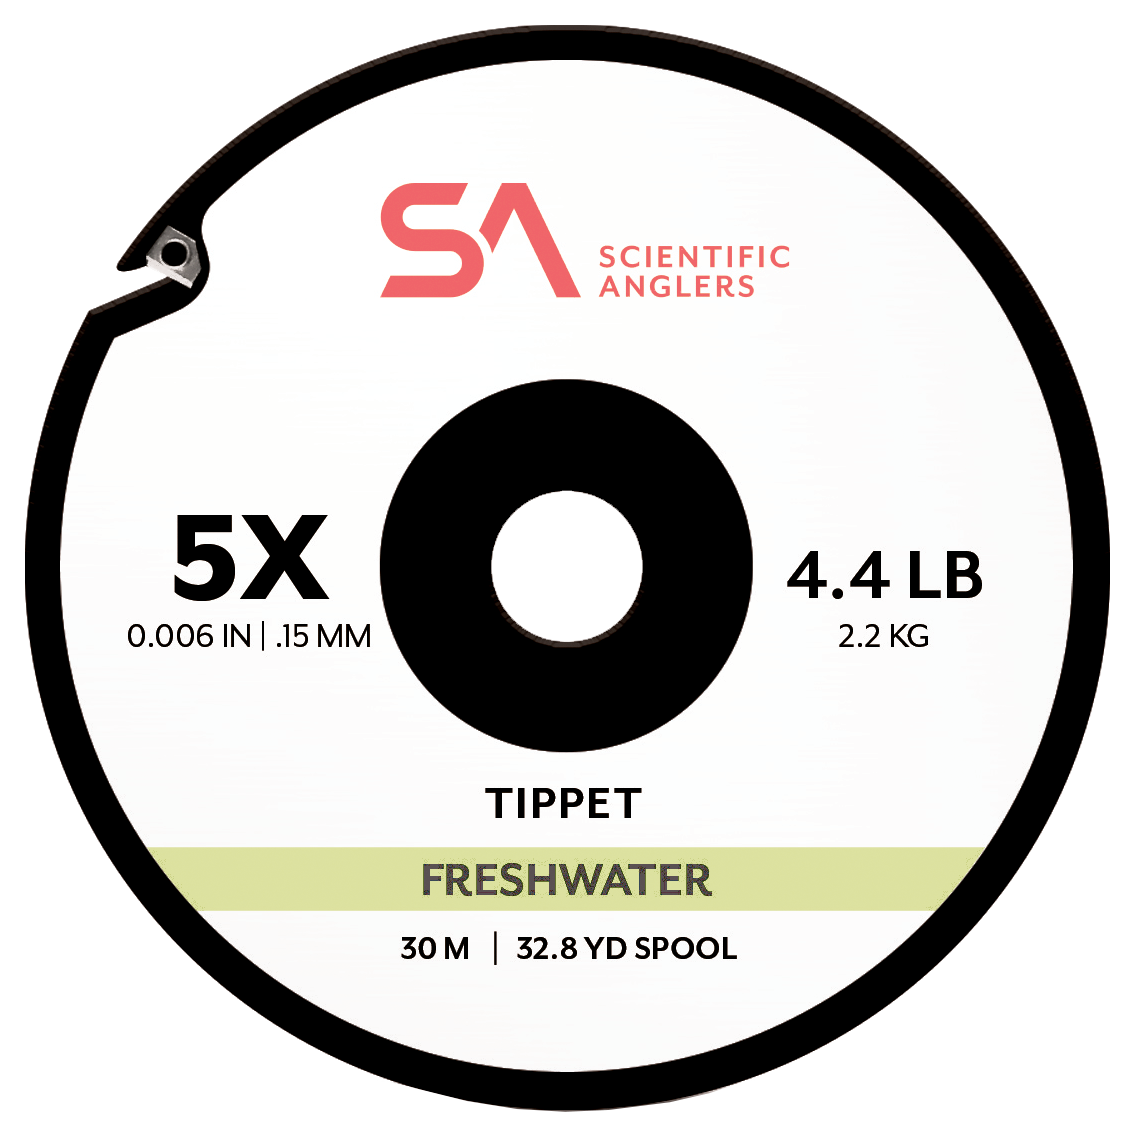 Scientific Angler Freshwater Tippet - 6X